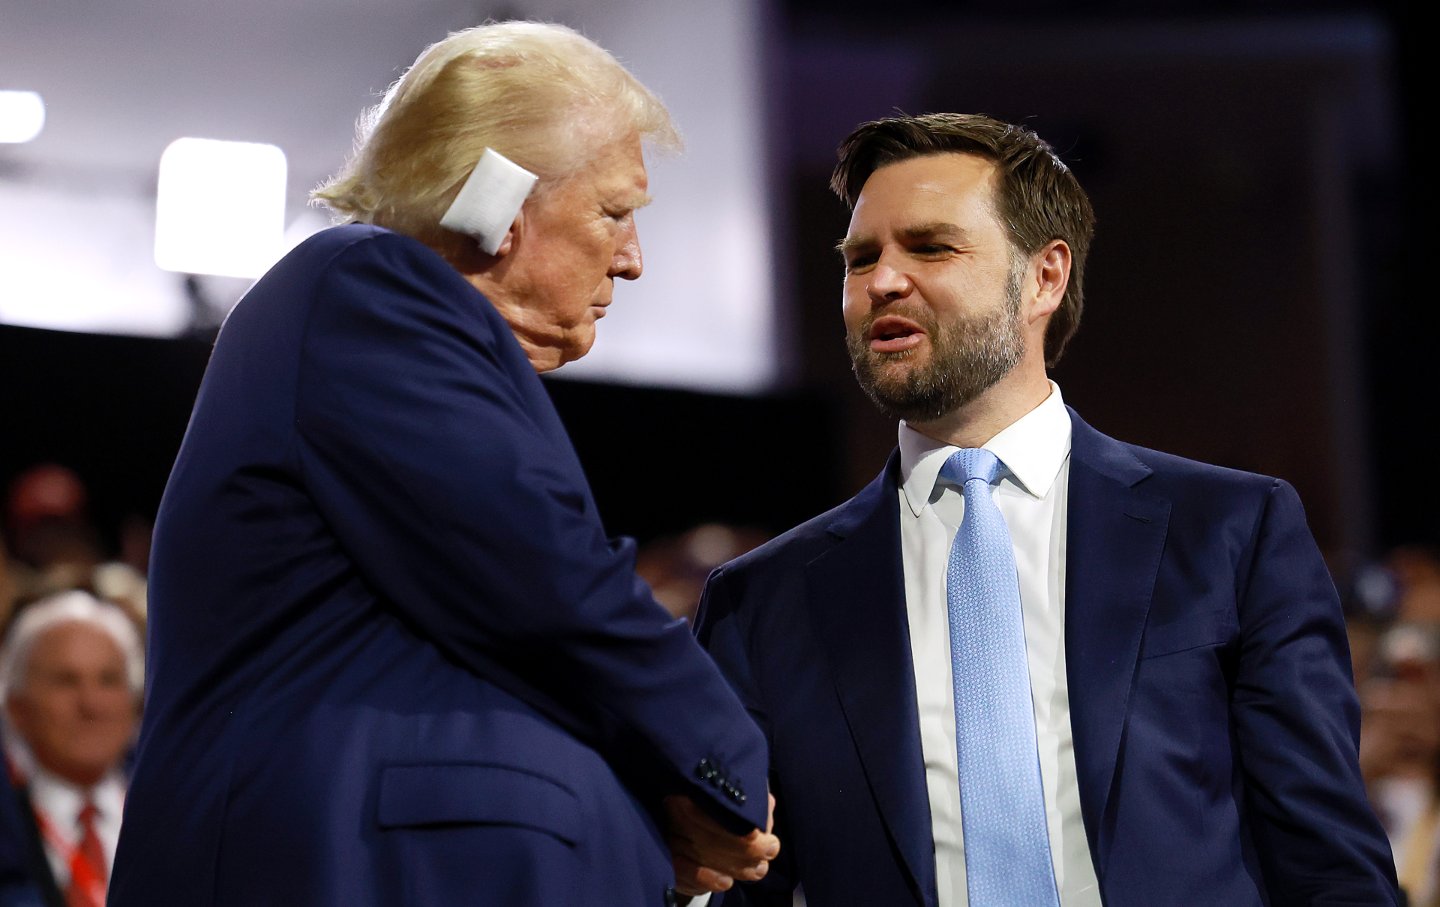 Trump leans toward JD Vance to shake his hand, onstage at the RNC.